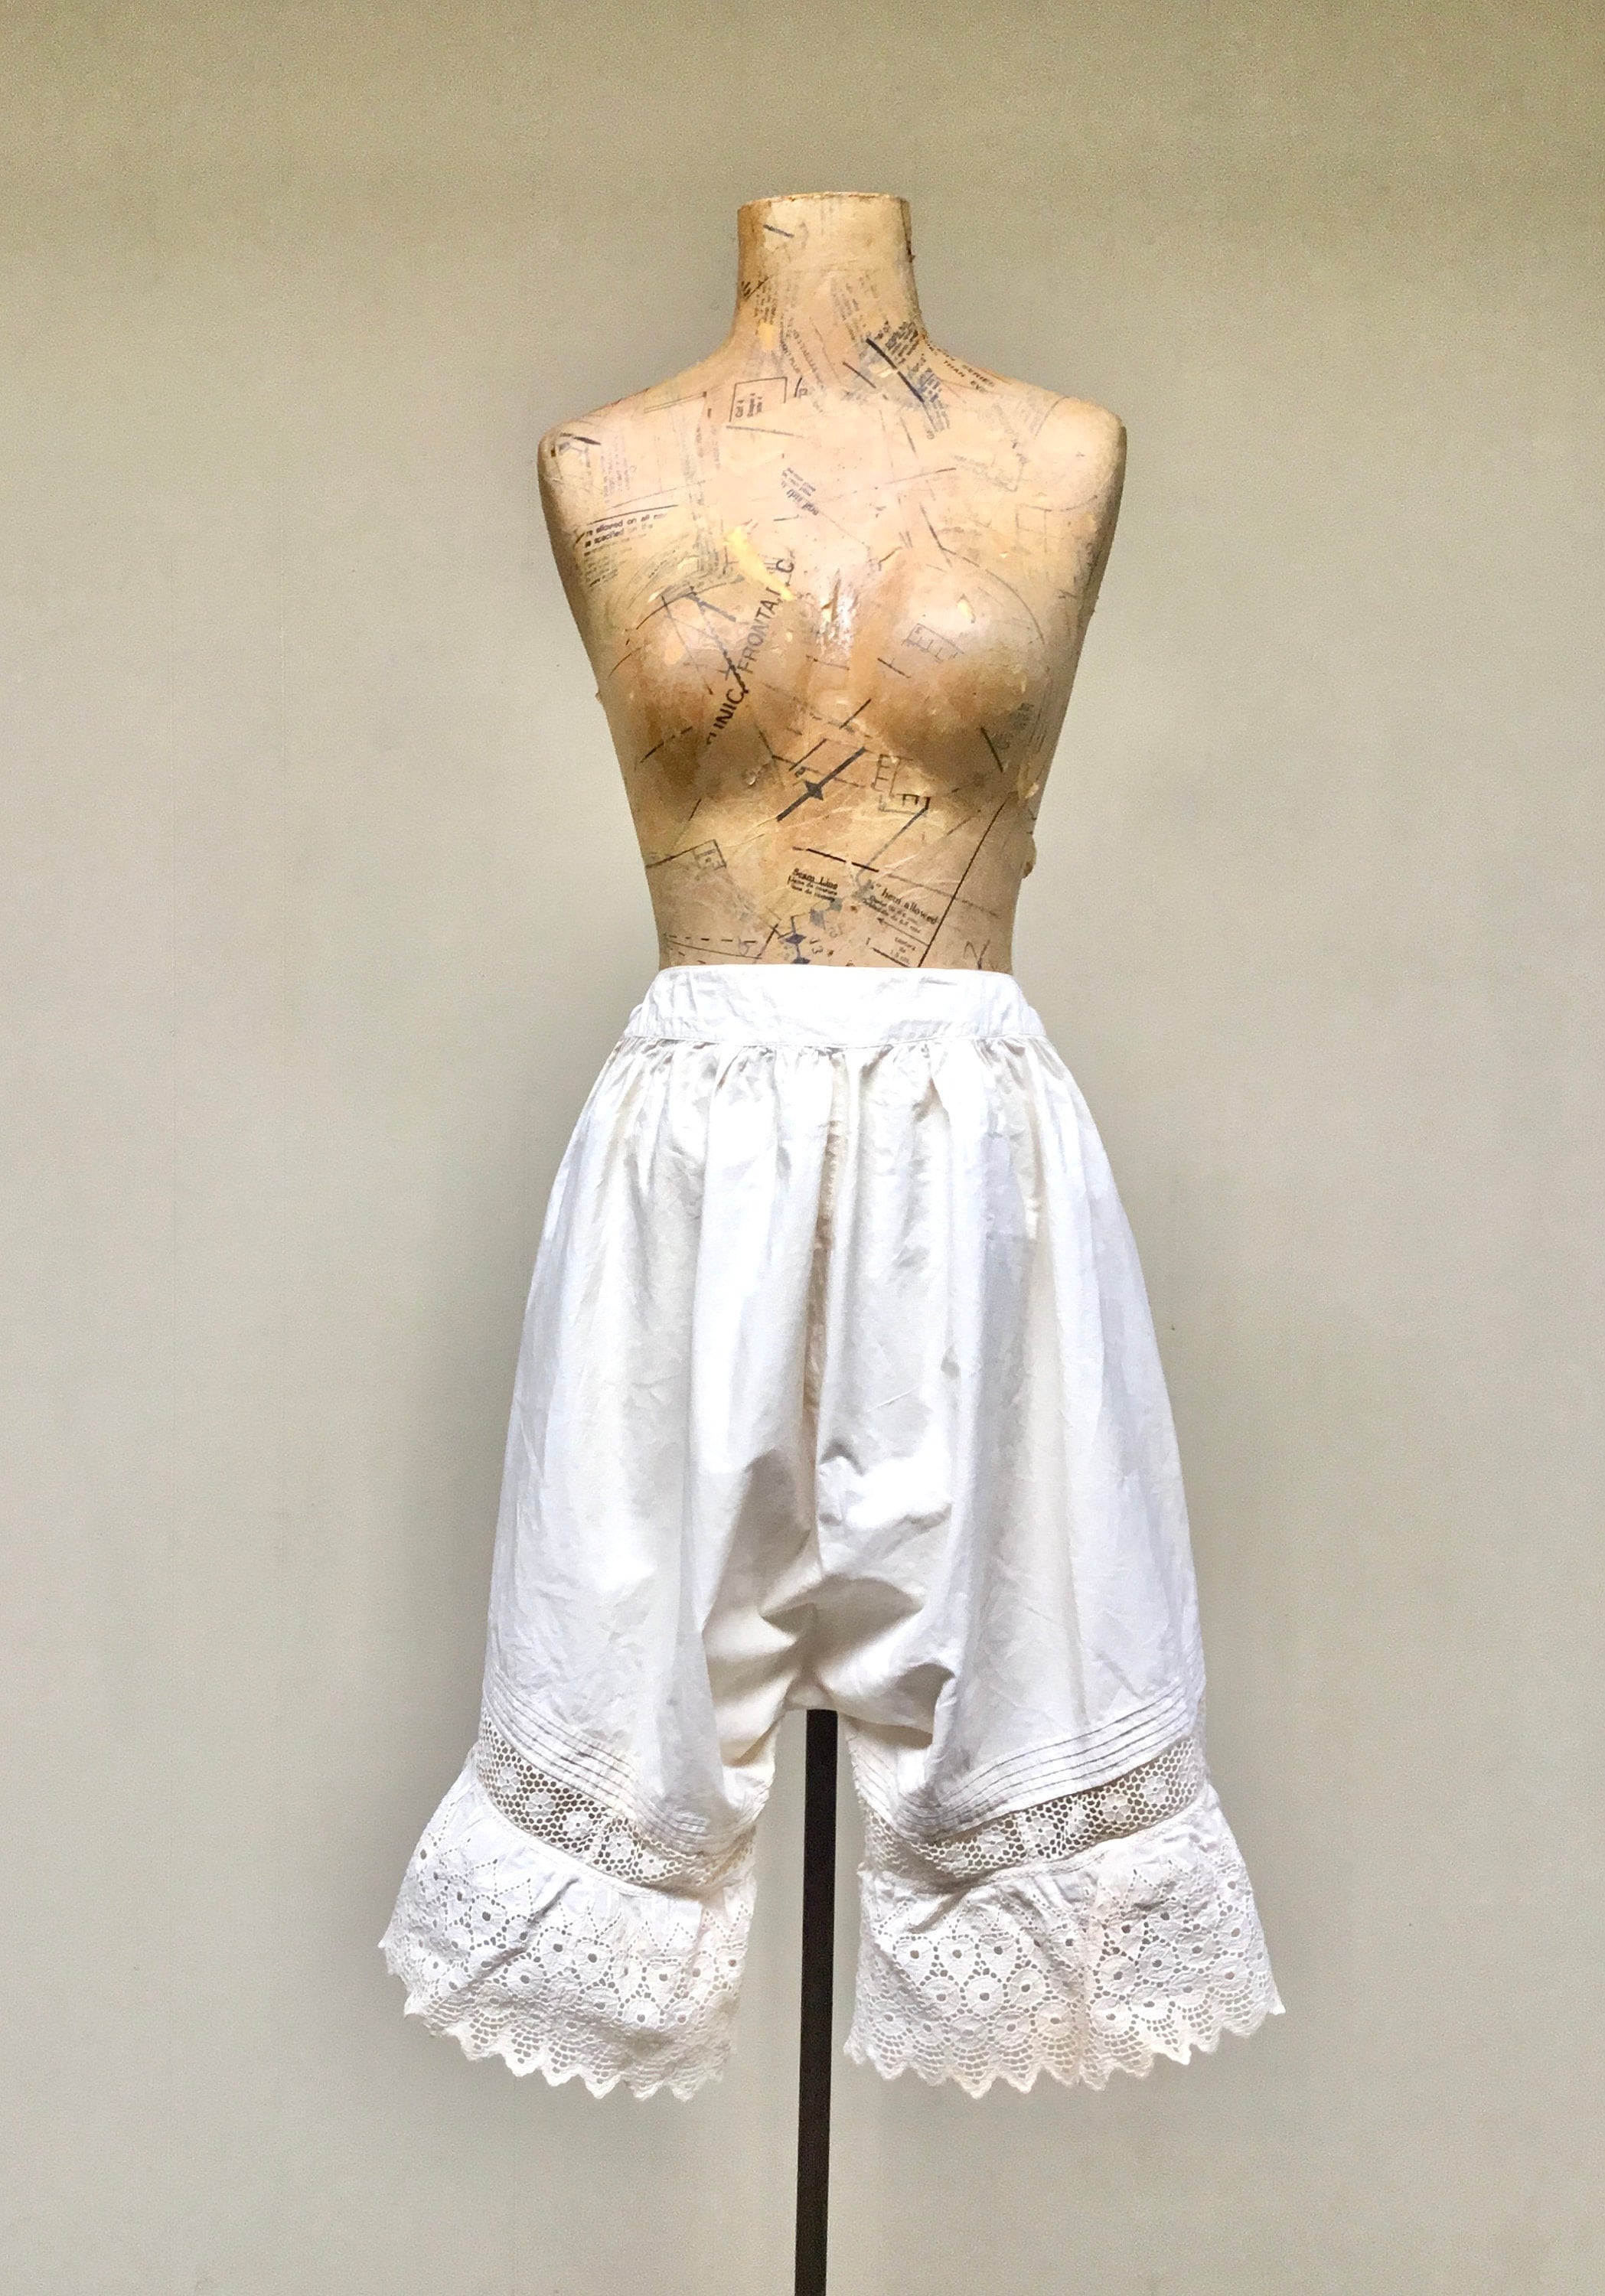 Antique 1910s Edwardian Drawers, White Cotton and Eyelet Lace Bloomers,  Ladies Underwear, Extra Small 22 Inch Waist, VFG 